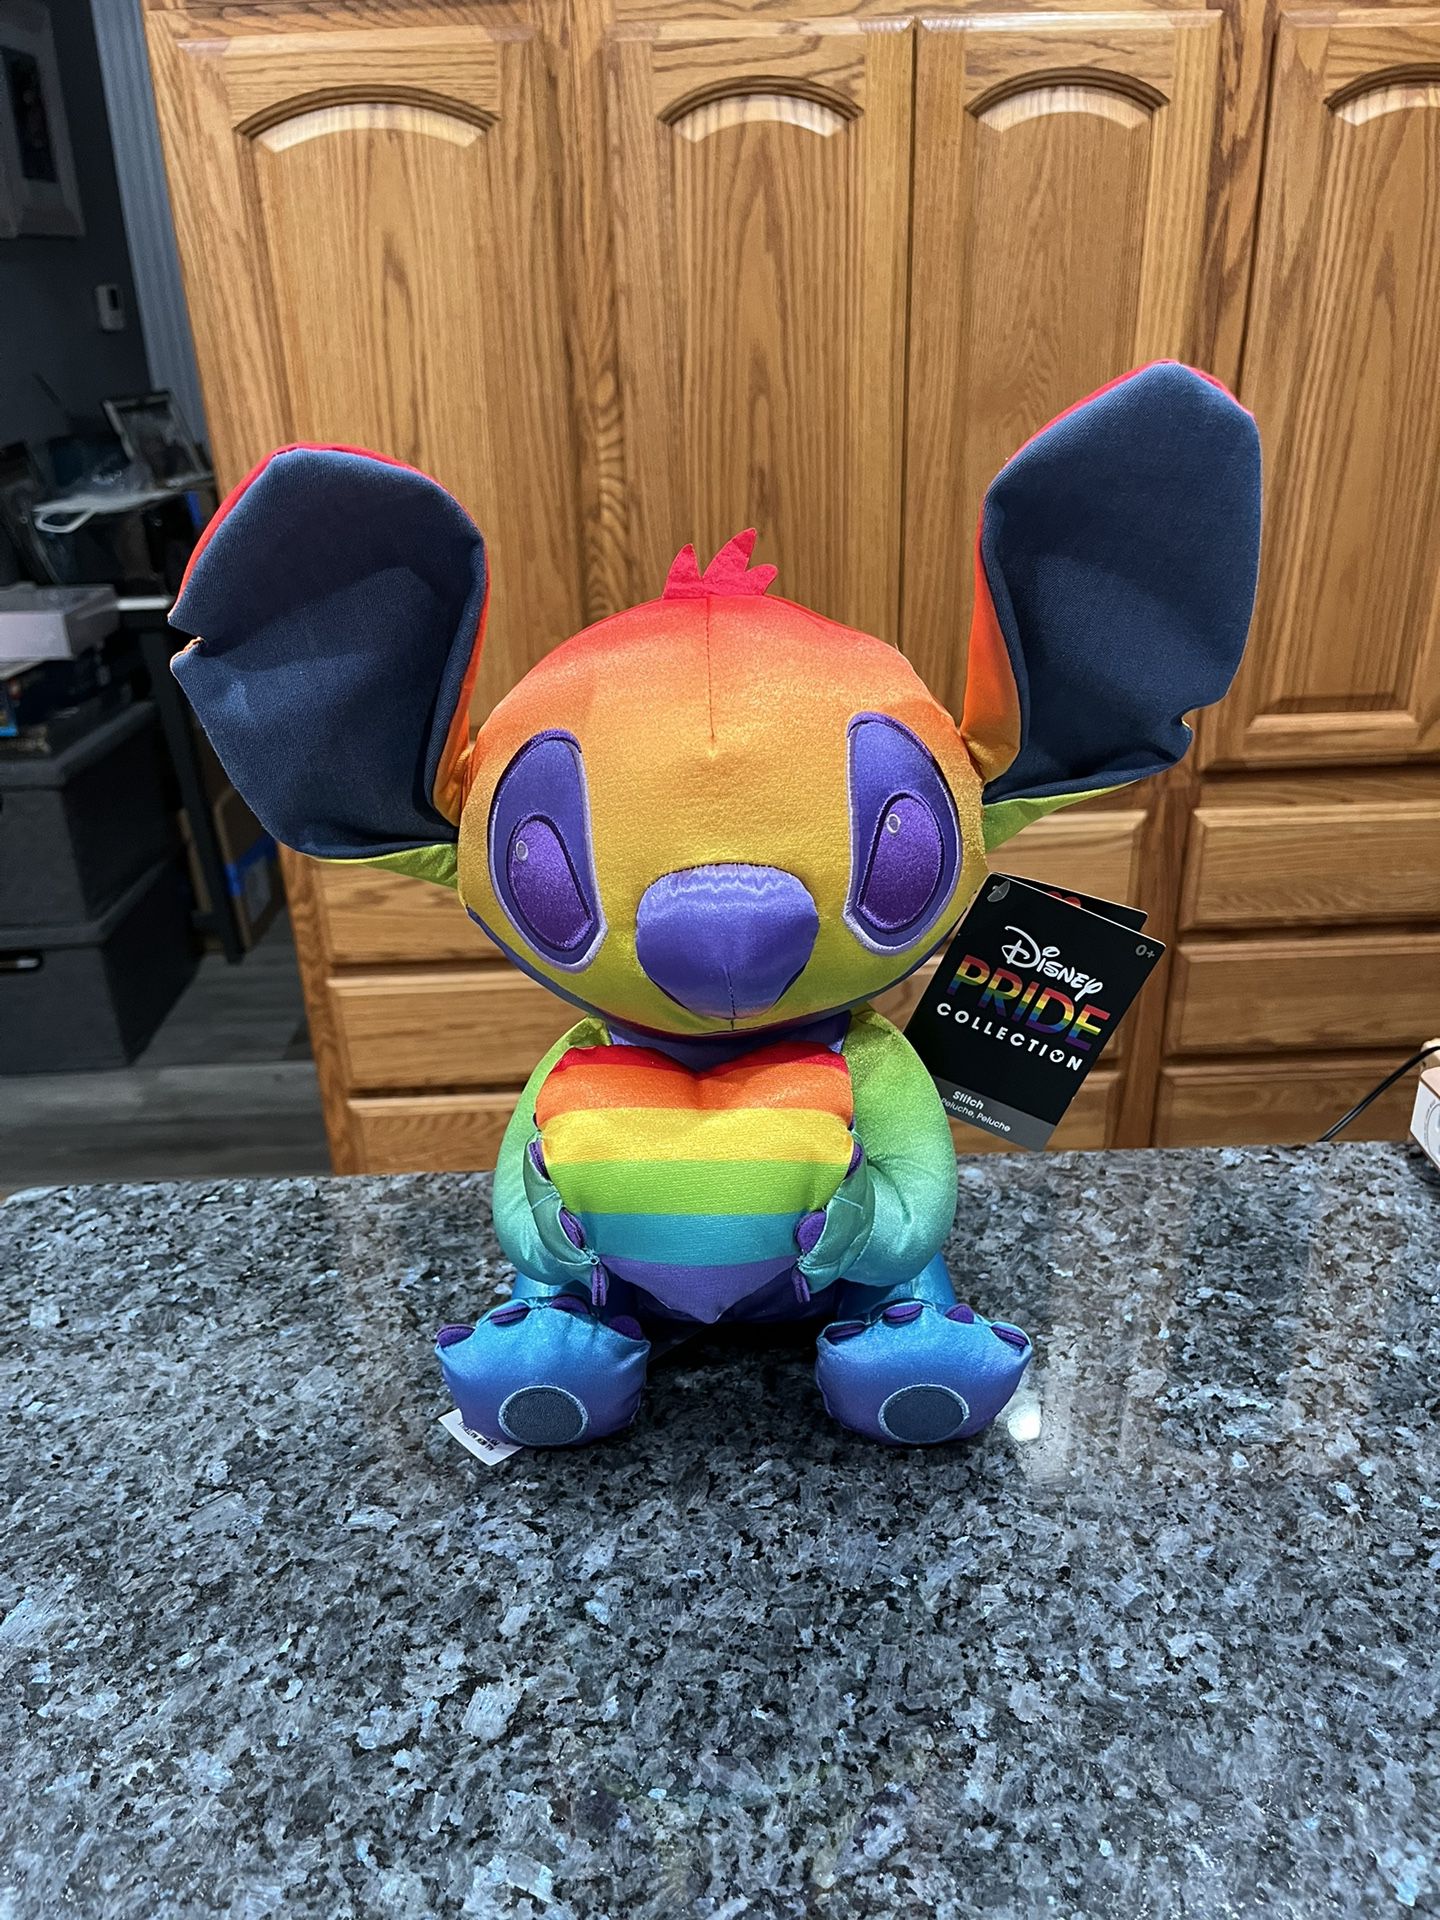 Disney Store Japan Stitch Plush Doll Disney Pride Collection Rainbow Color .  Brand New with Tag